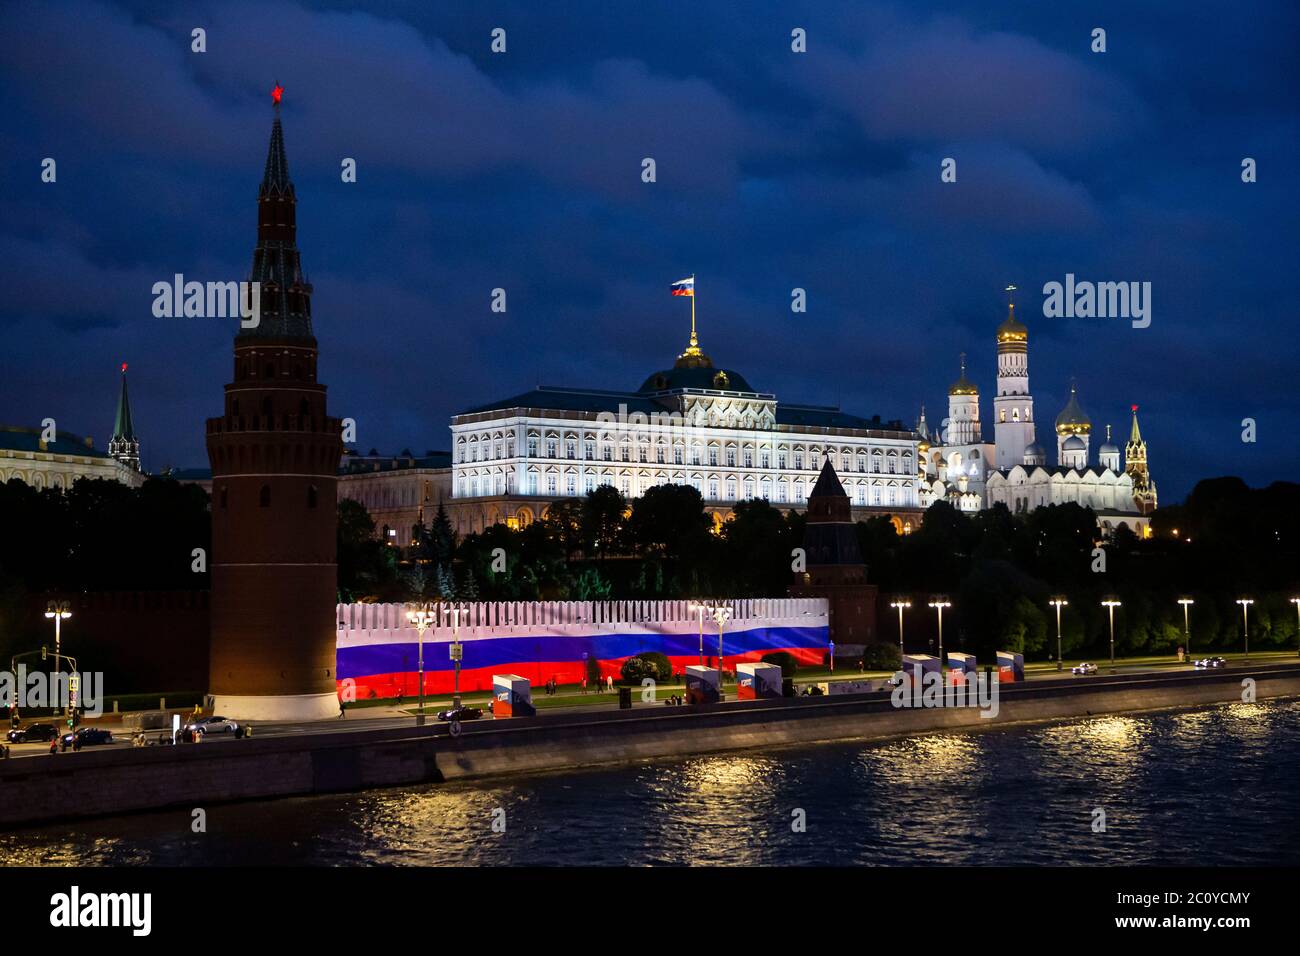 Moscow, Russia. 12th June, 2020. Russian national flag is projected on the Kremlin wall to celebrate Russia day in Moscow, Russia, on June 12, 2020. Credit: Alexander Zemlianichenko Jr/Xinhua/Alamy Live News Stock Photo